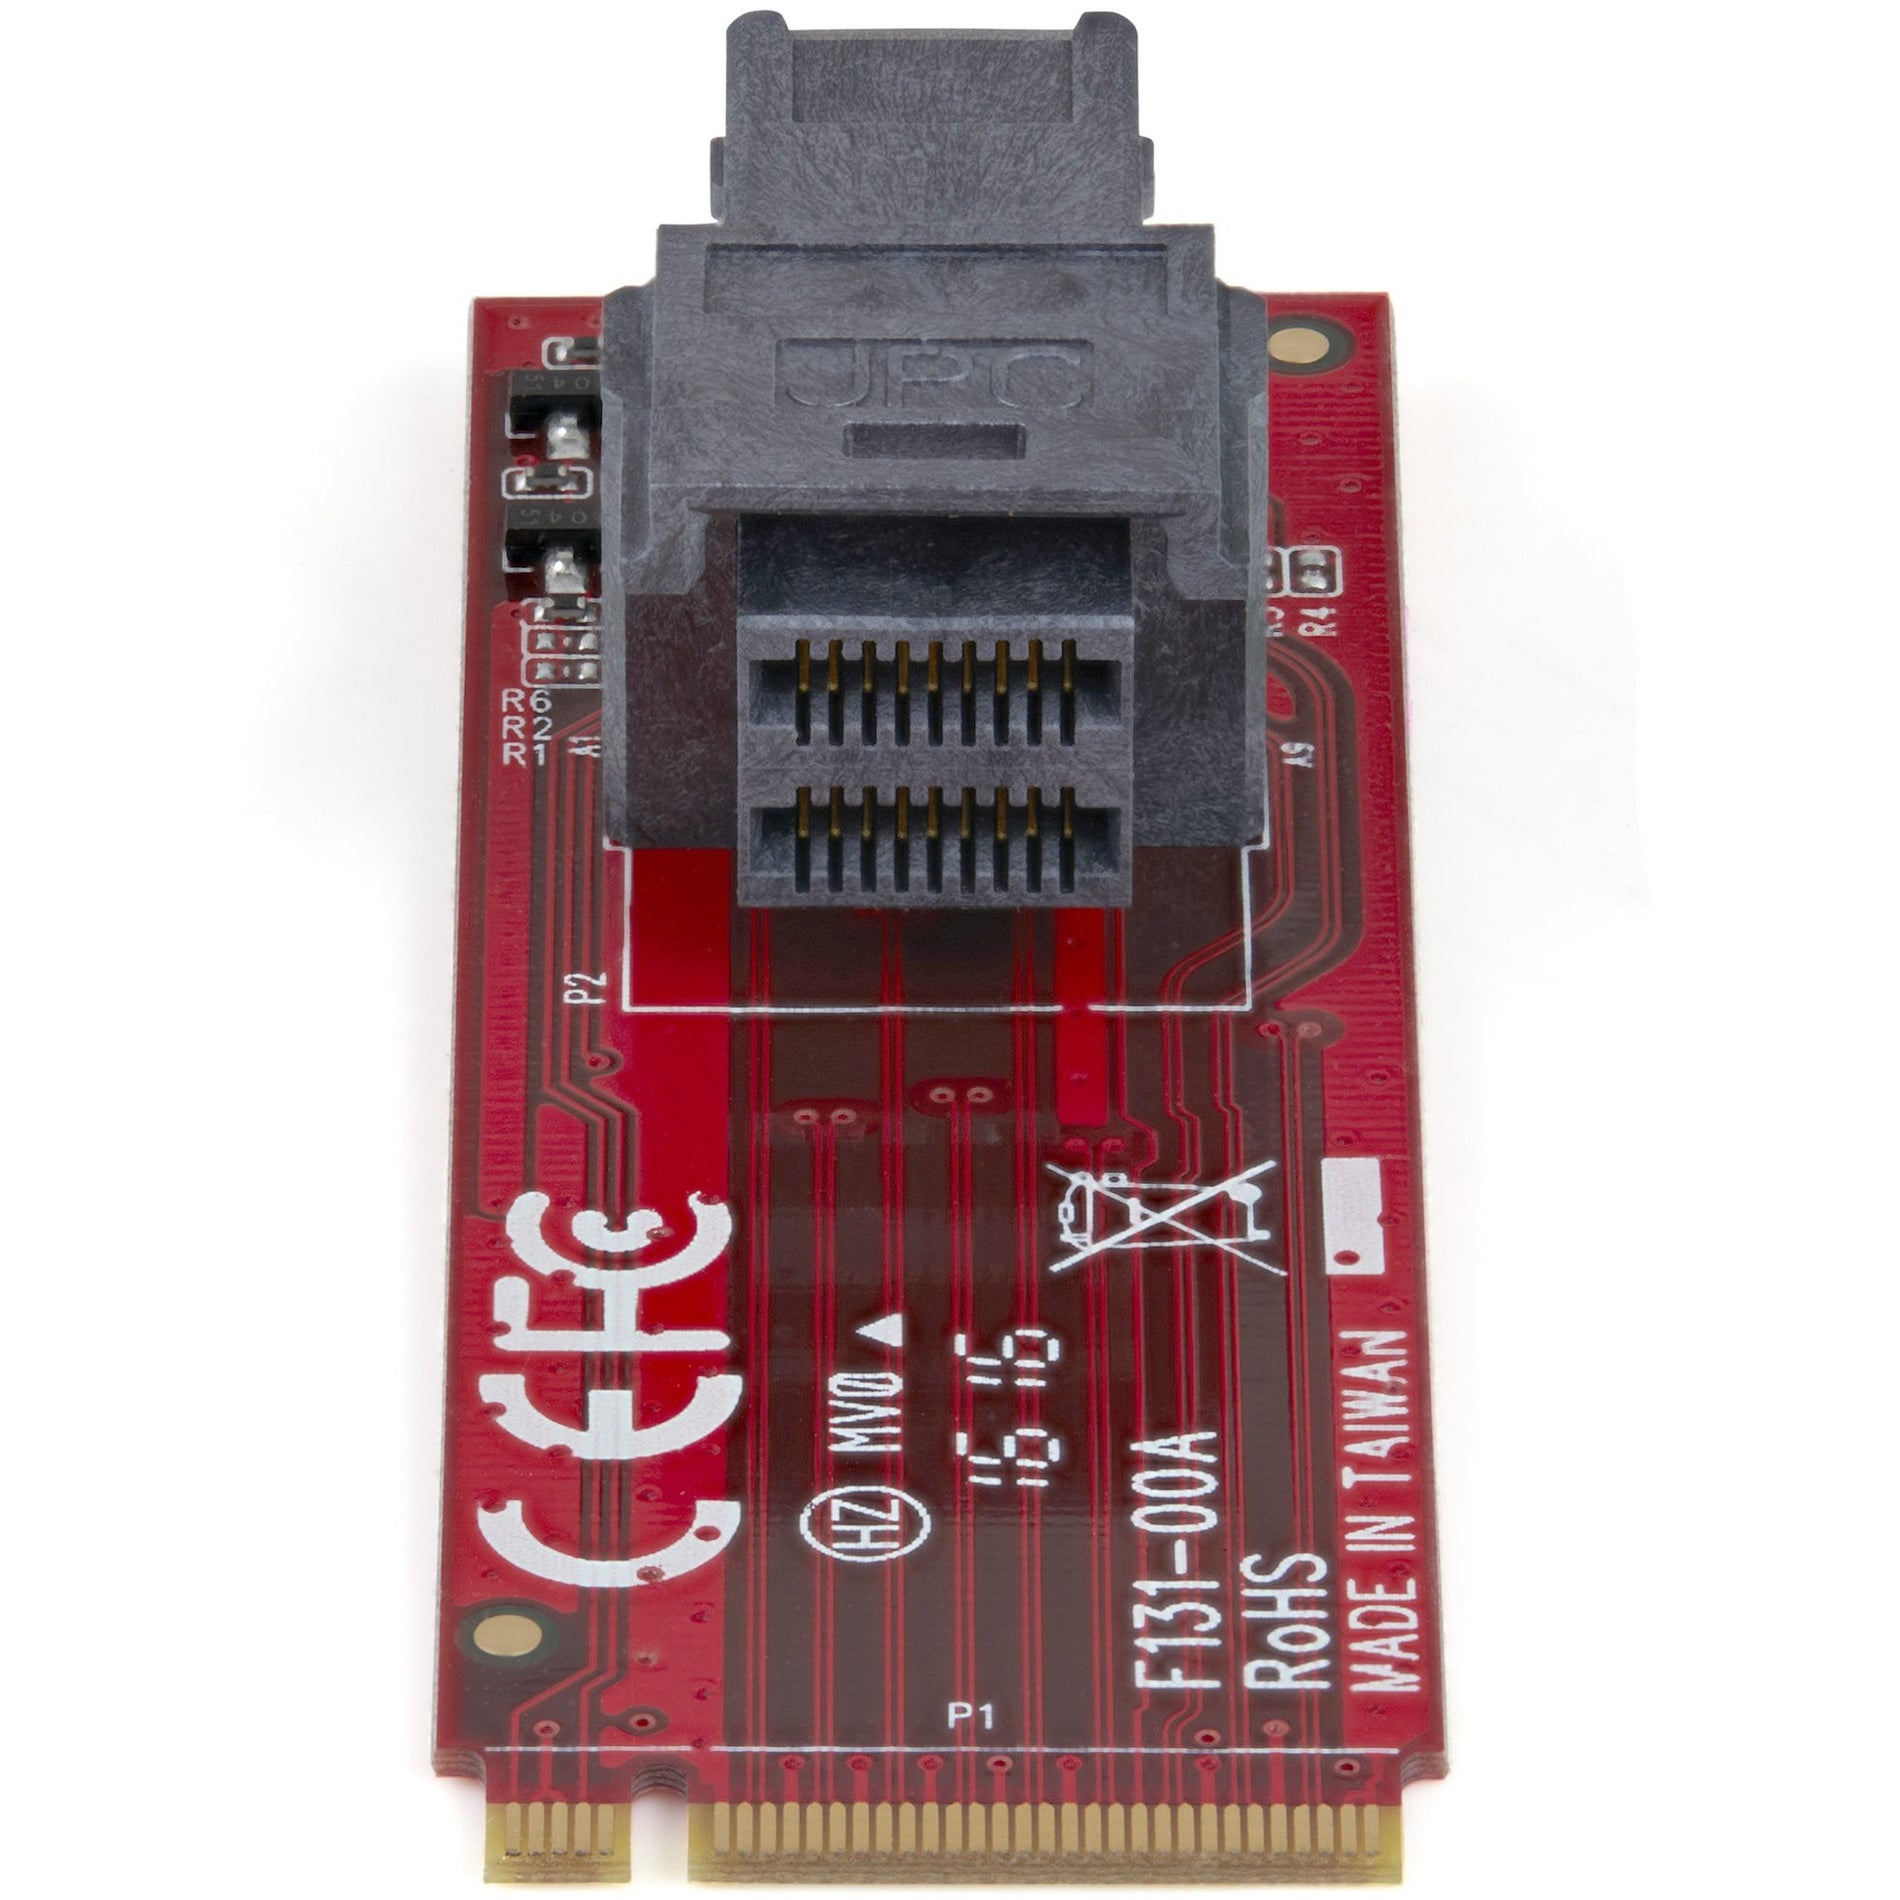 StarTech.com M2E4SFF8643 U.2 to M.2 Adapter for U.2 NVMe SSD, PCIe x4 Host Interface, Red